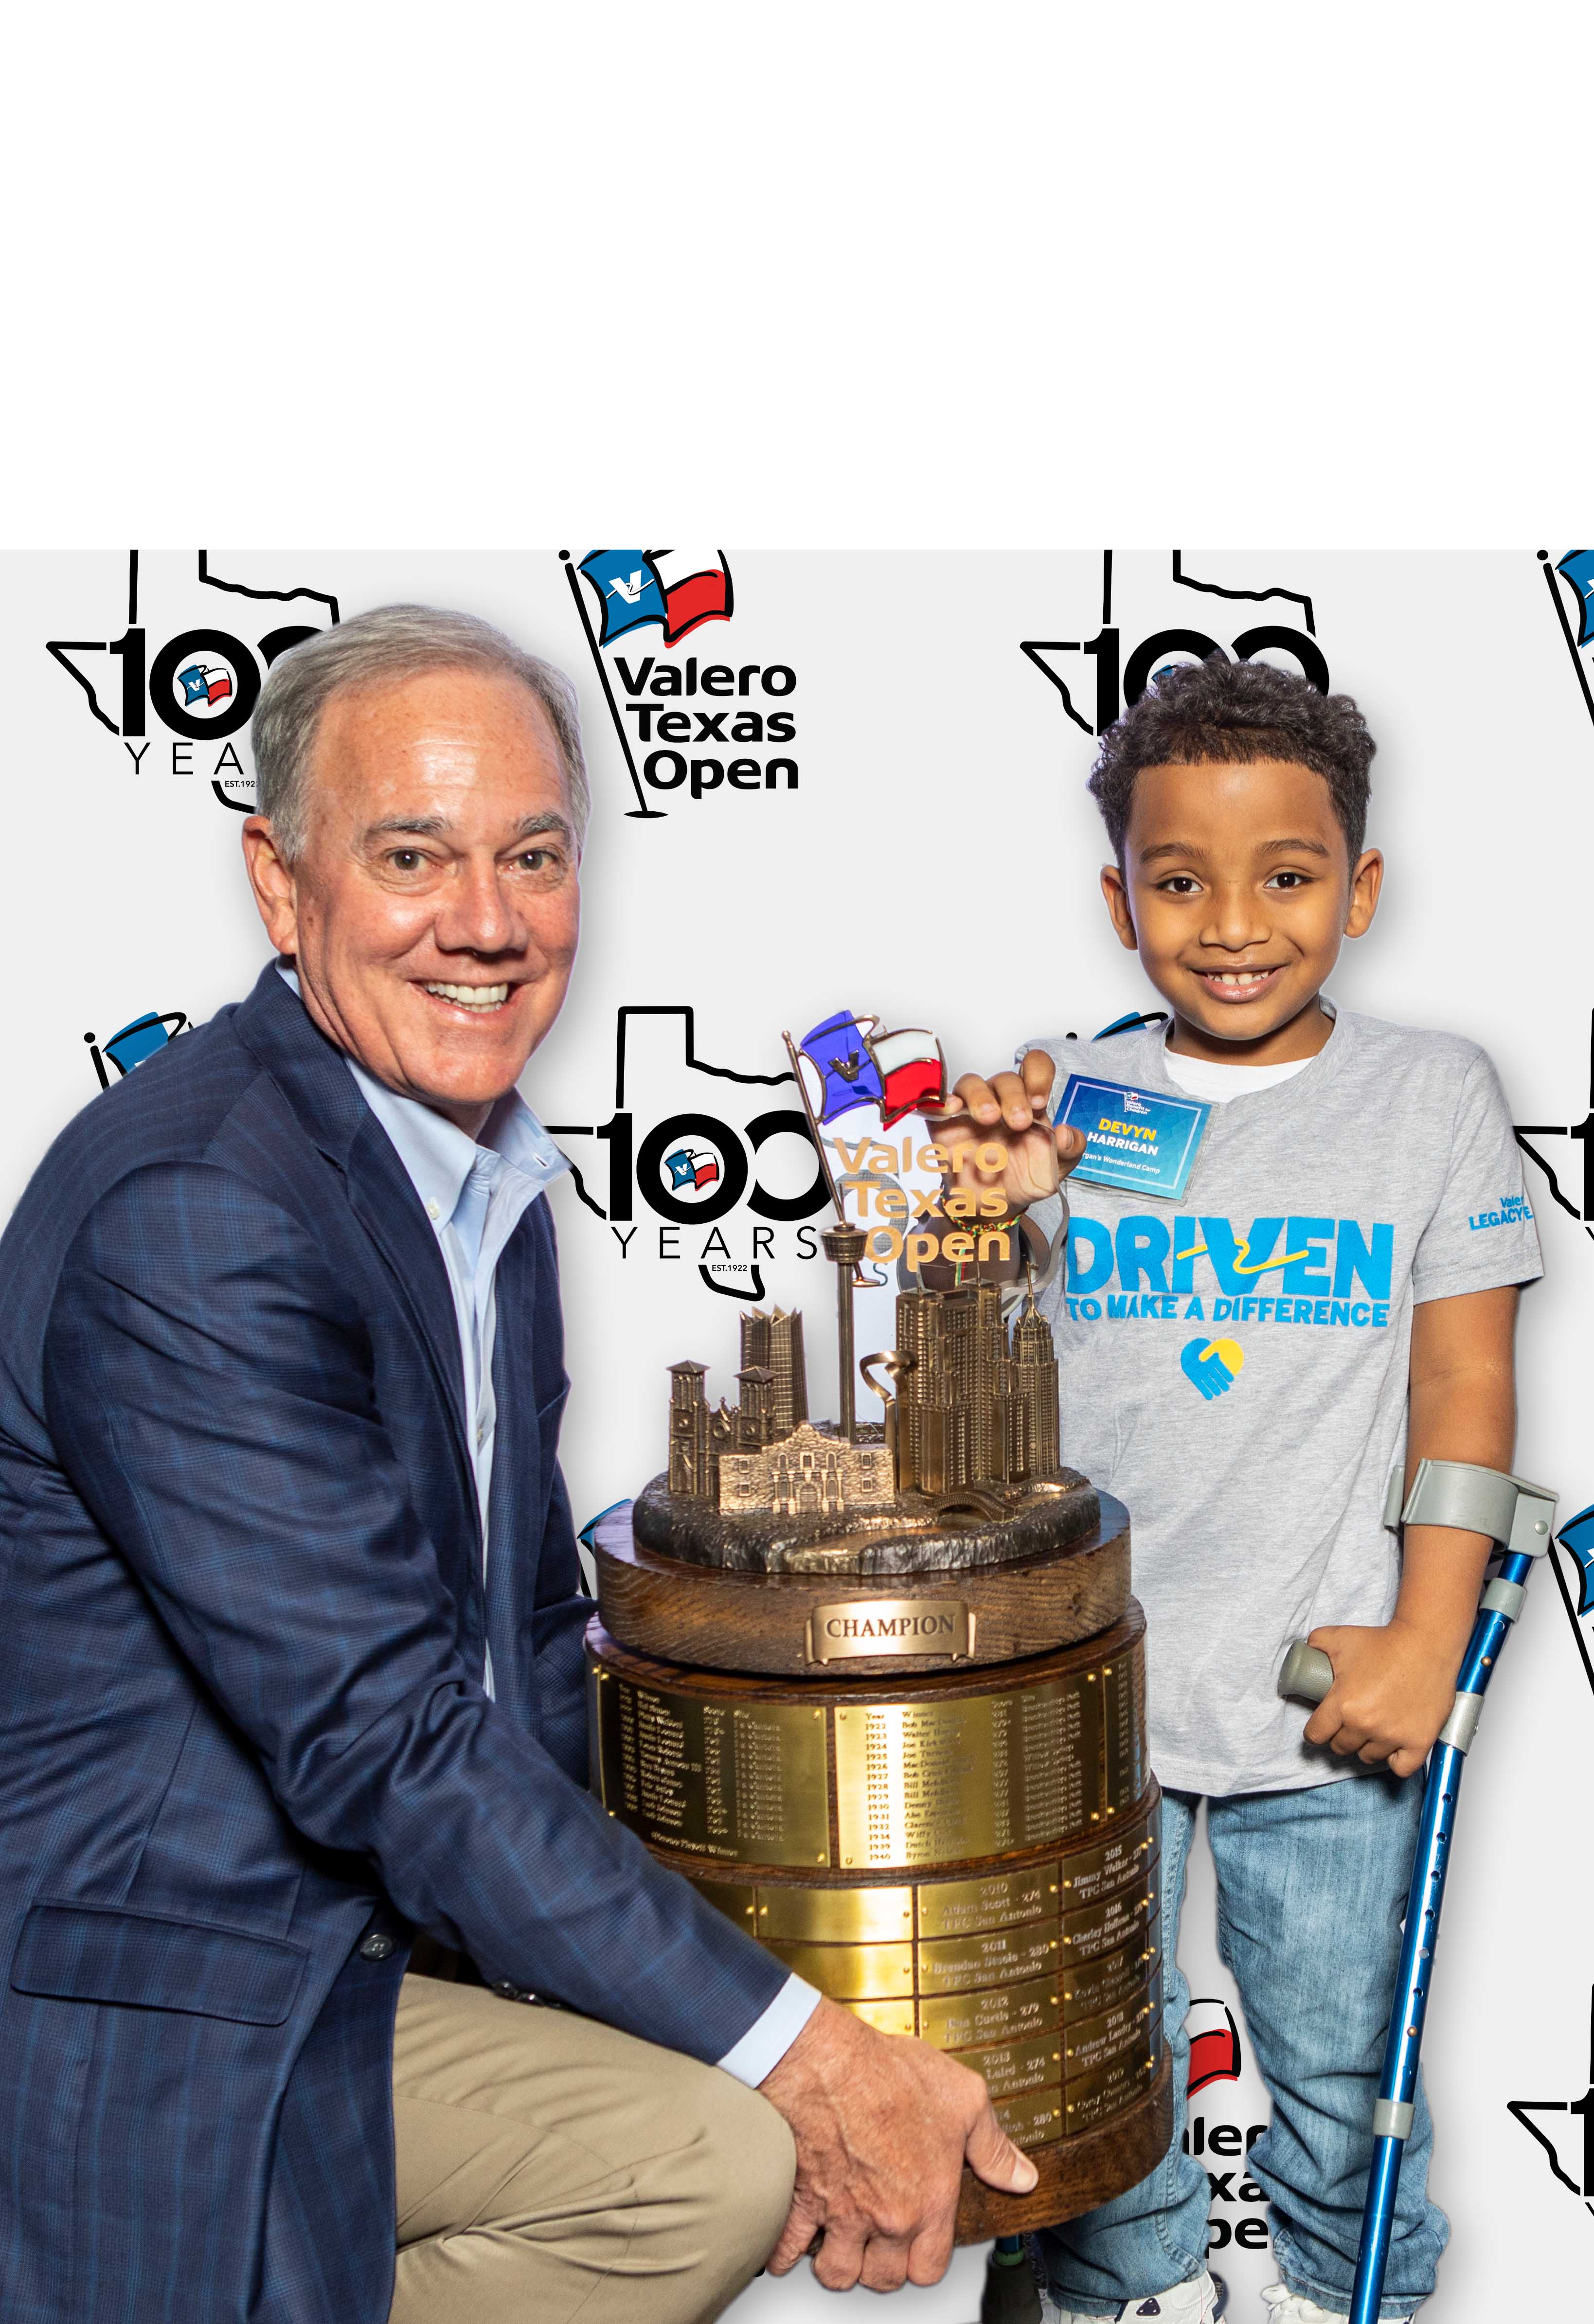 CEO Joe Gorder holding trophy next to young boy